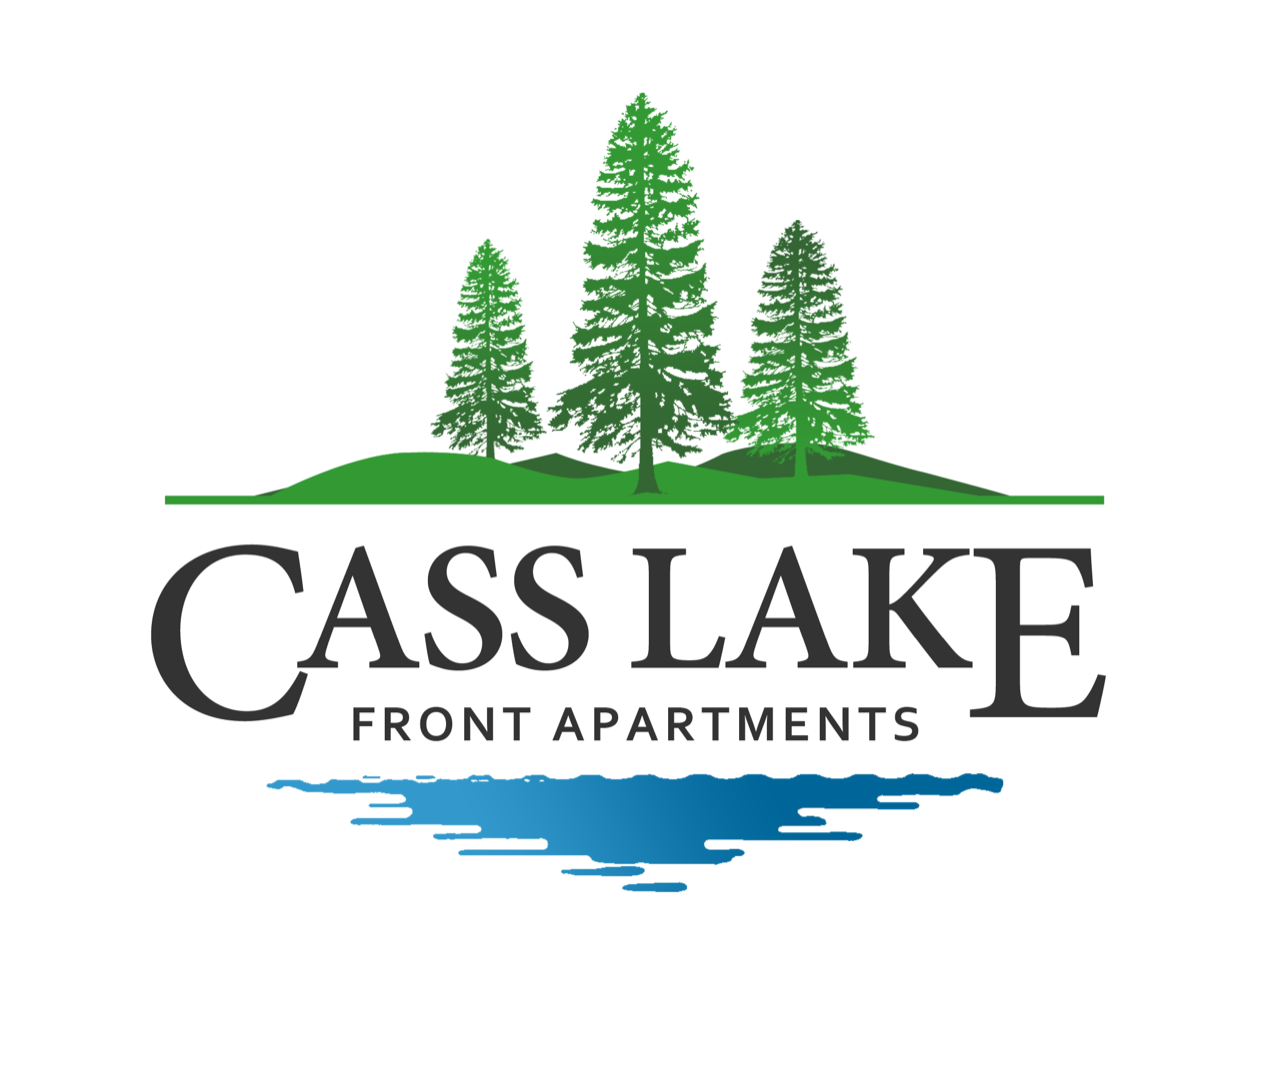 Cass Lake Front Apartments